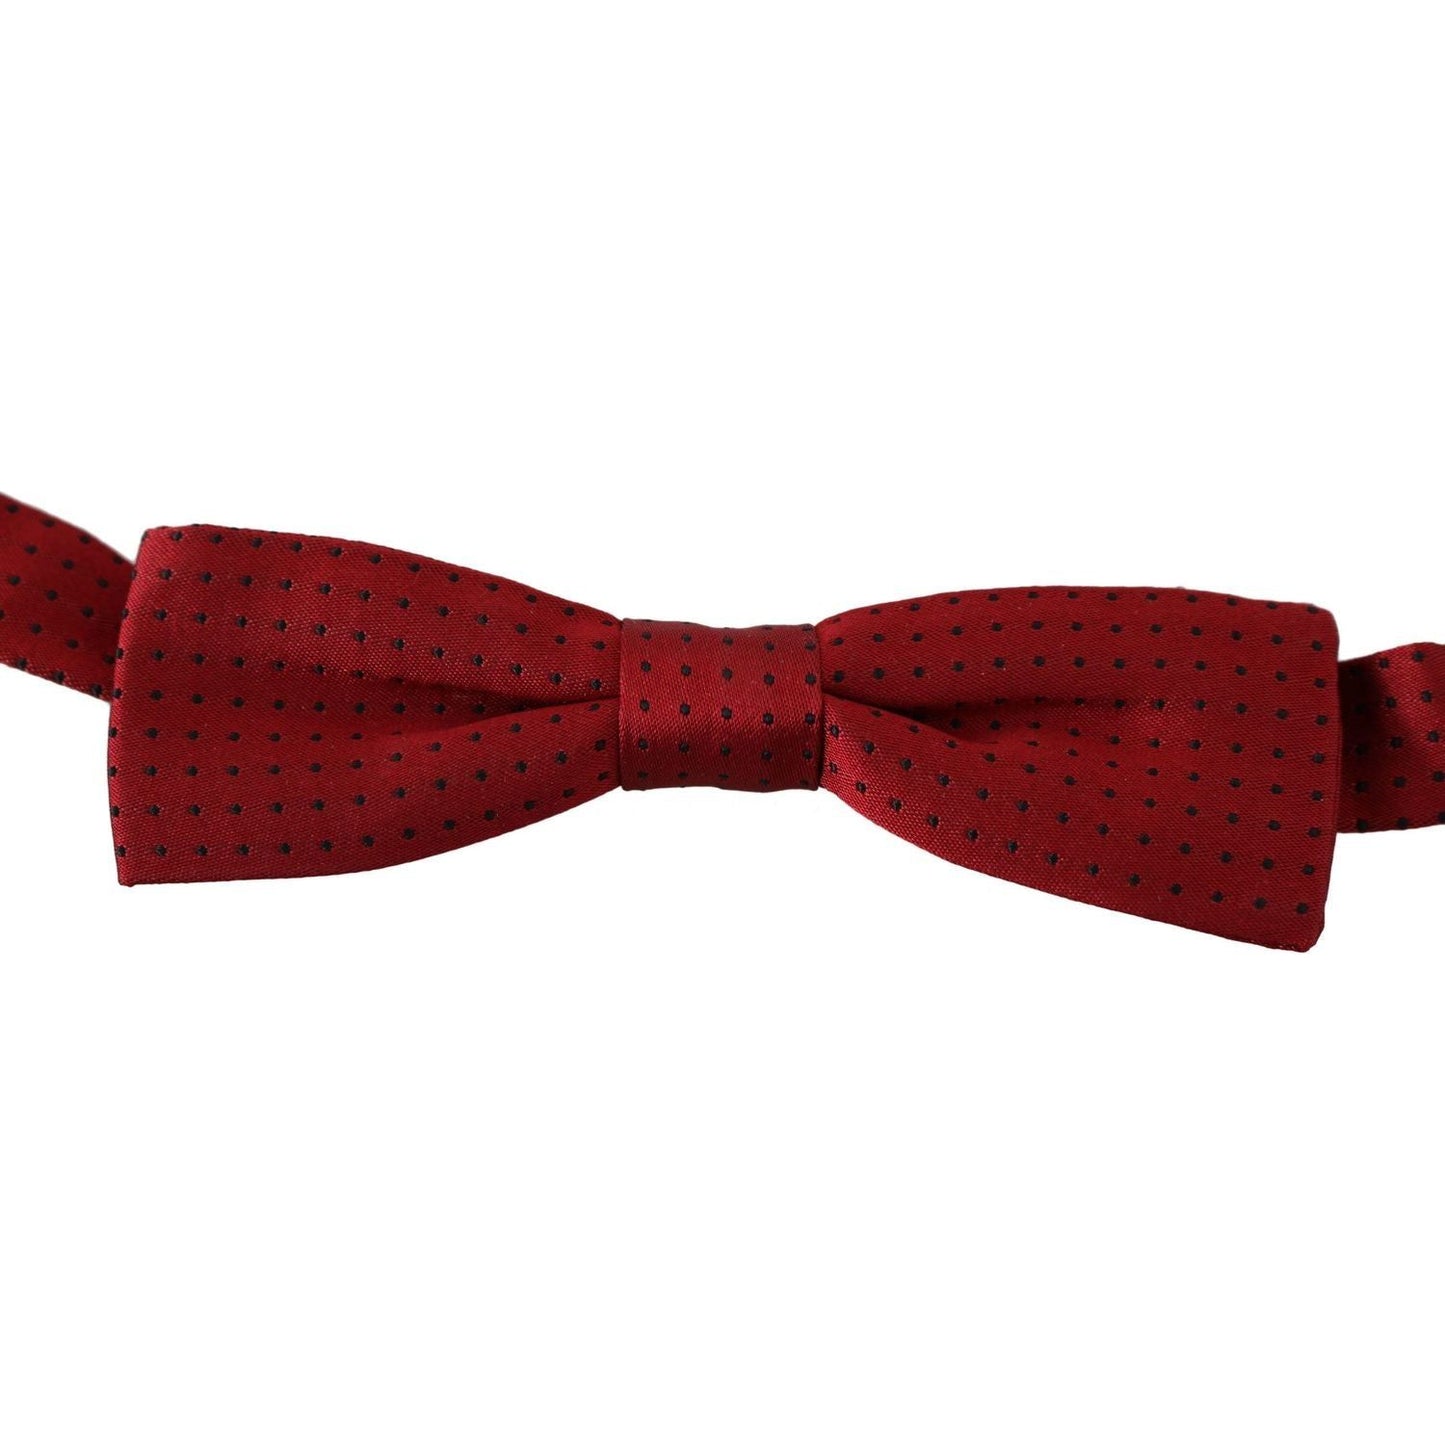 Dolce & Gabbana Elegant Red Dotted Silk Bow Tie Bow Tie red-dotted-silk-adjustable-neck-papillon-bow-tie IMG_3783-scaled-52bf32b5-474.jpg